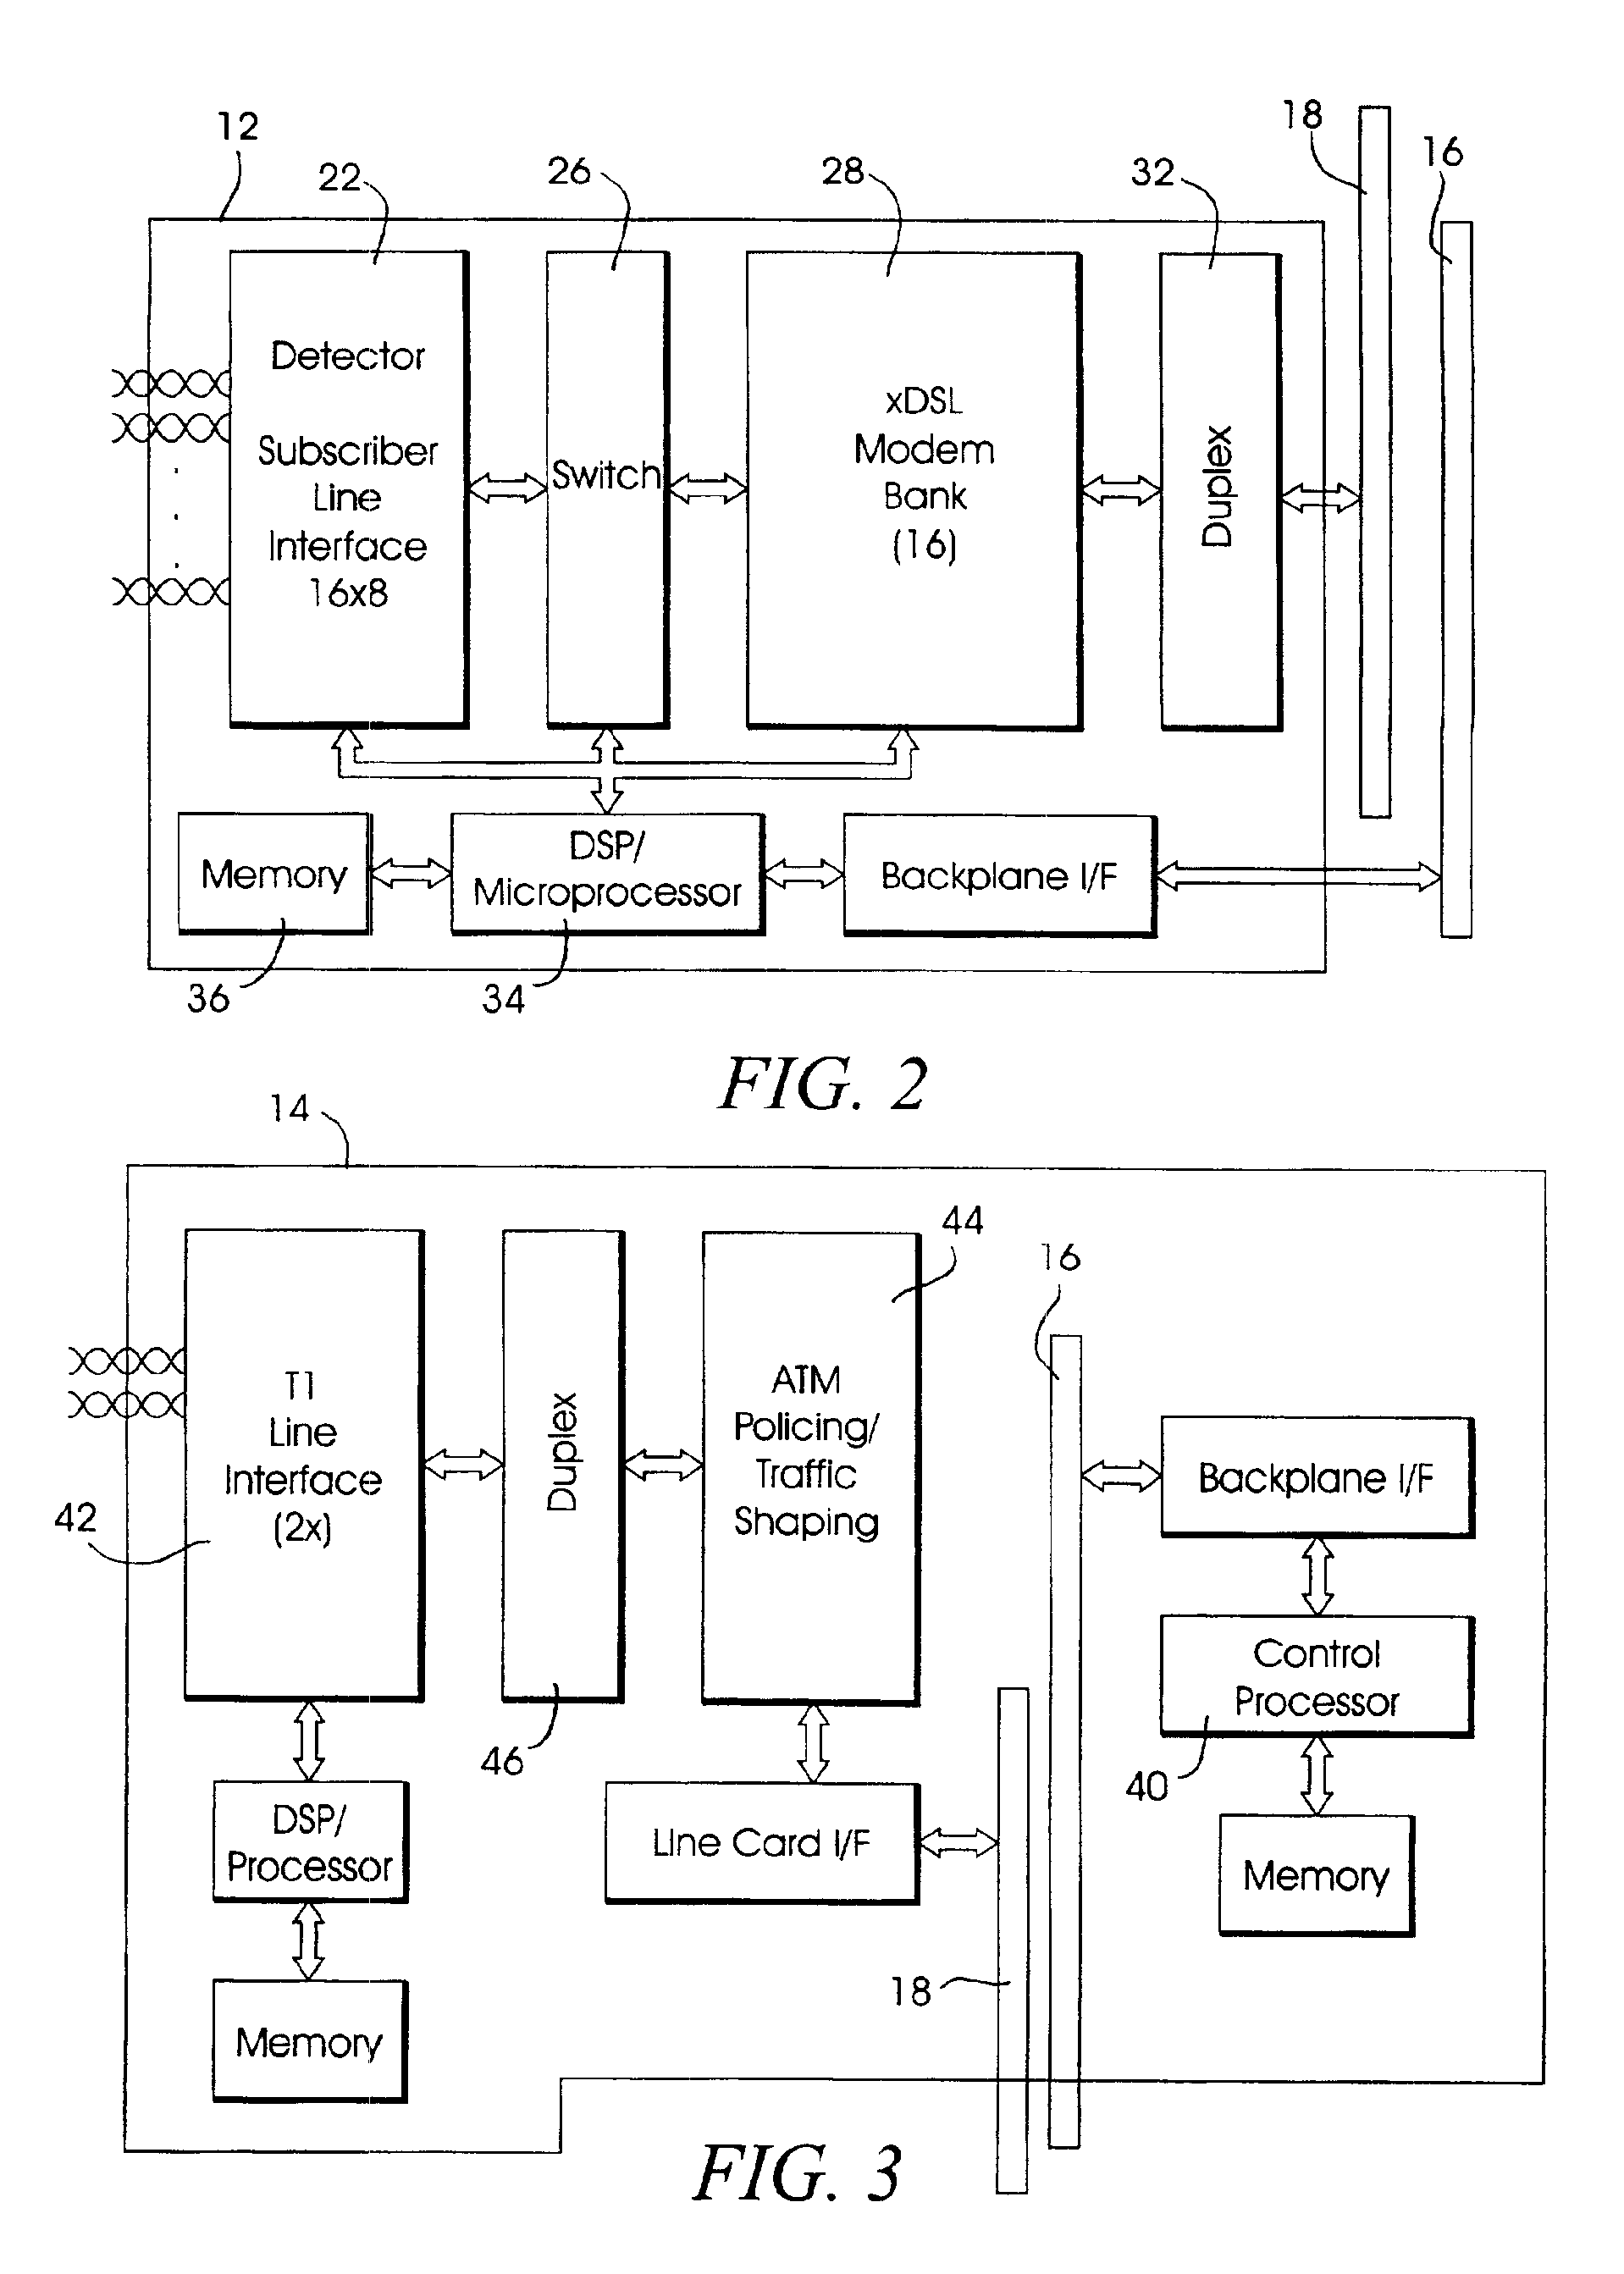 System and method for broadband roaming connectivity using DSL